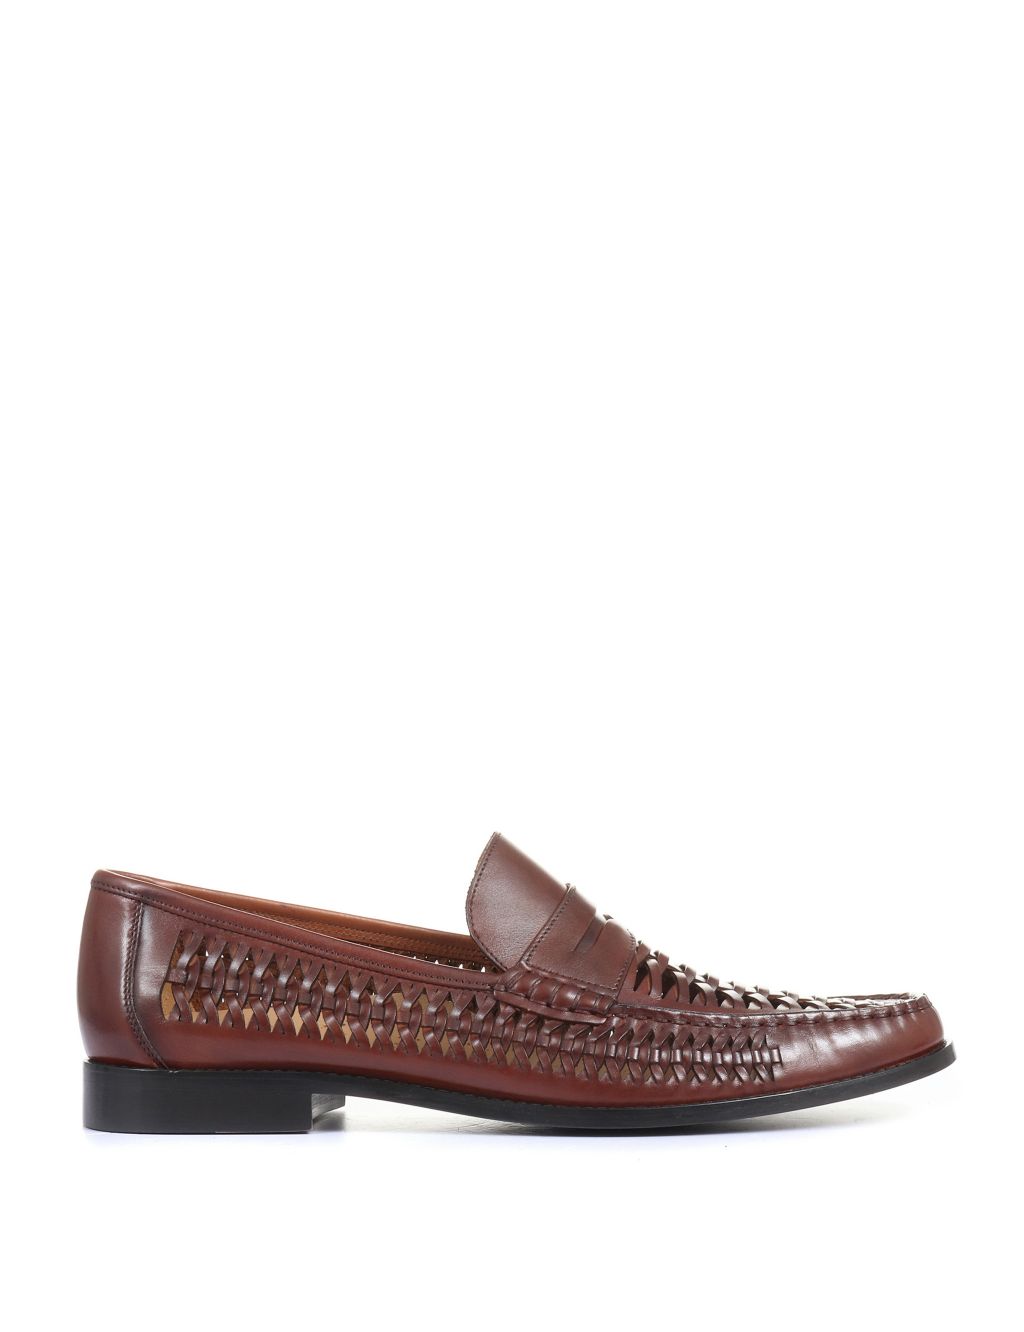 Leather Slip-On Loafers 1 of 7